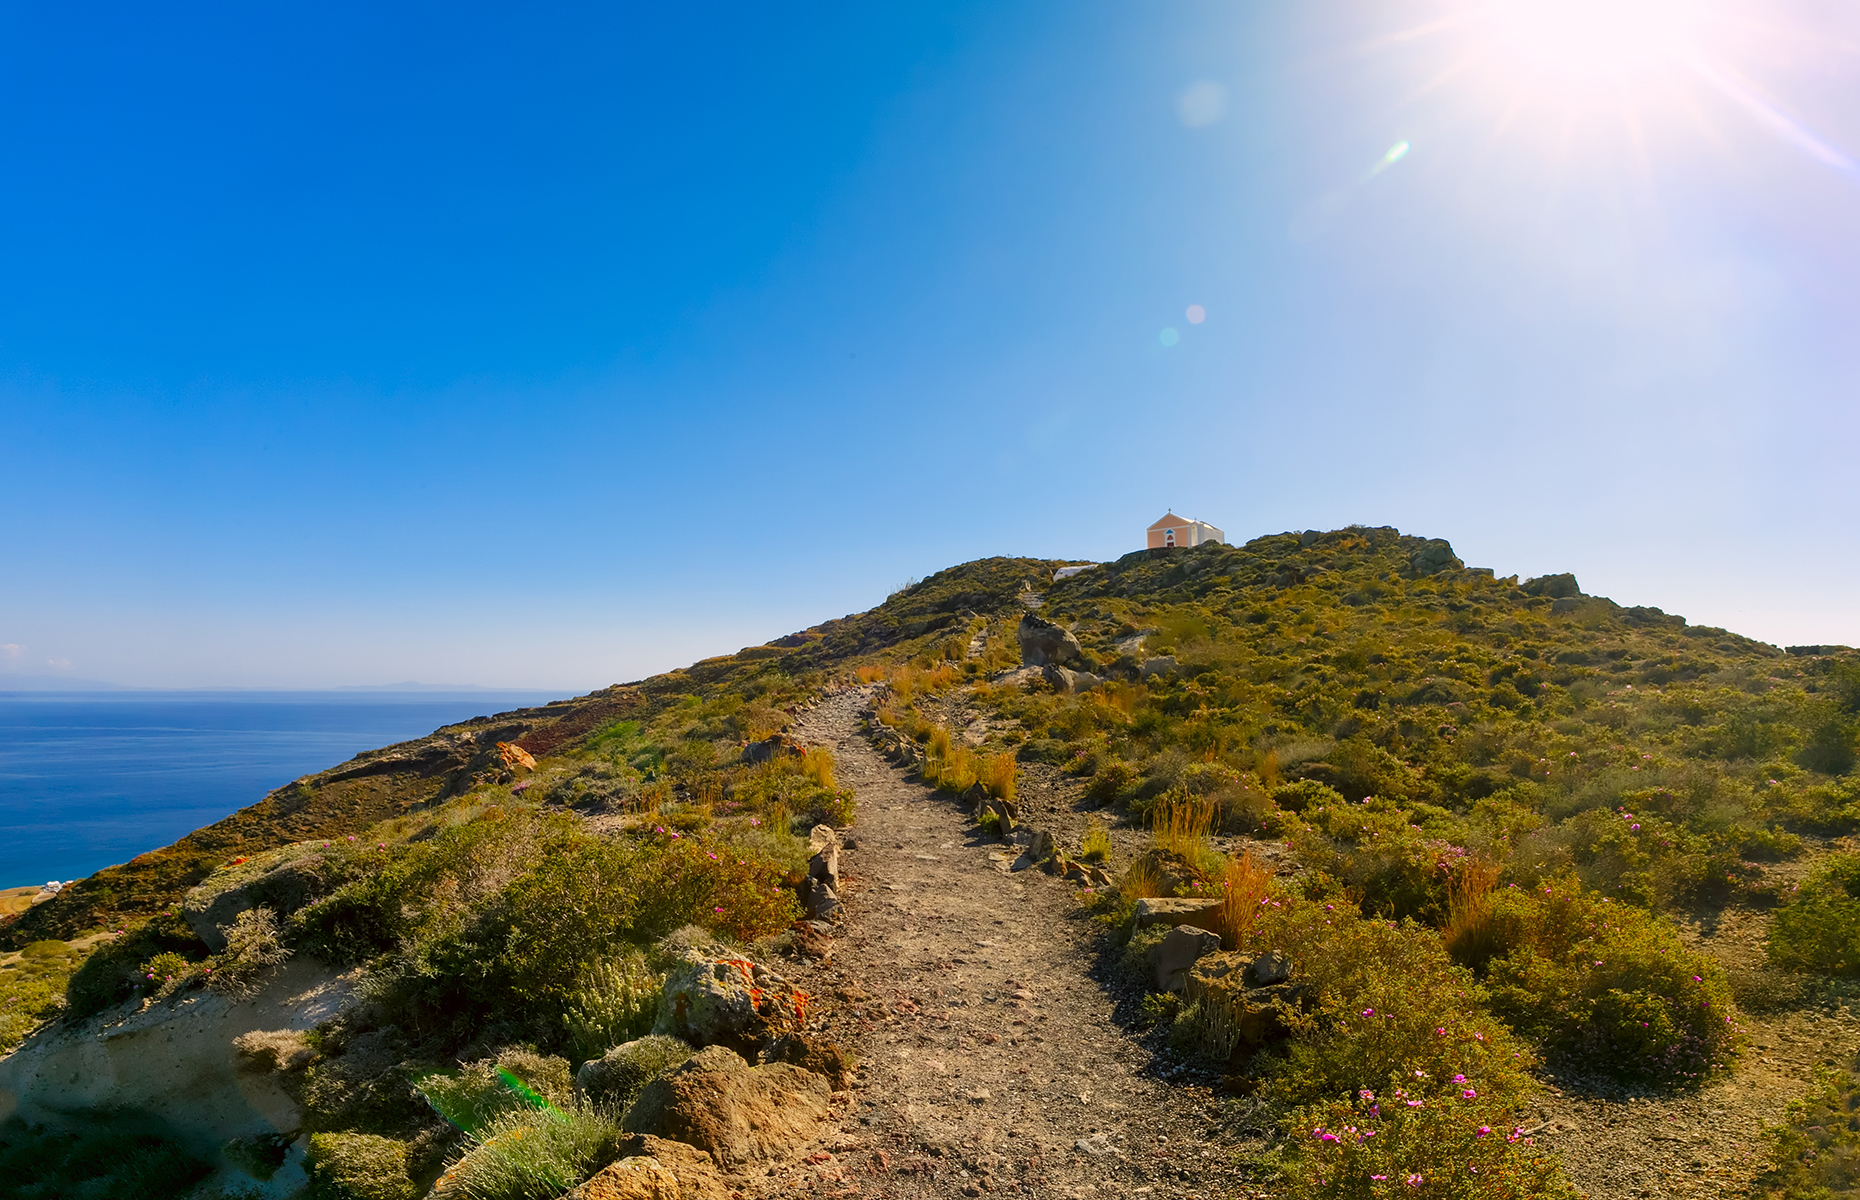 Hike from Fira to Oia (Image: kavalenkava/Shutterstock)